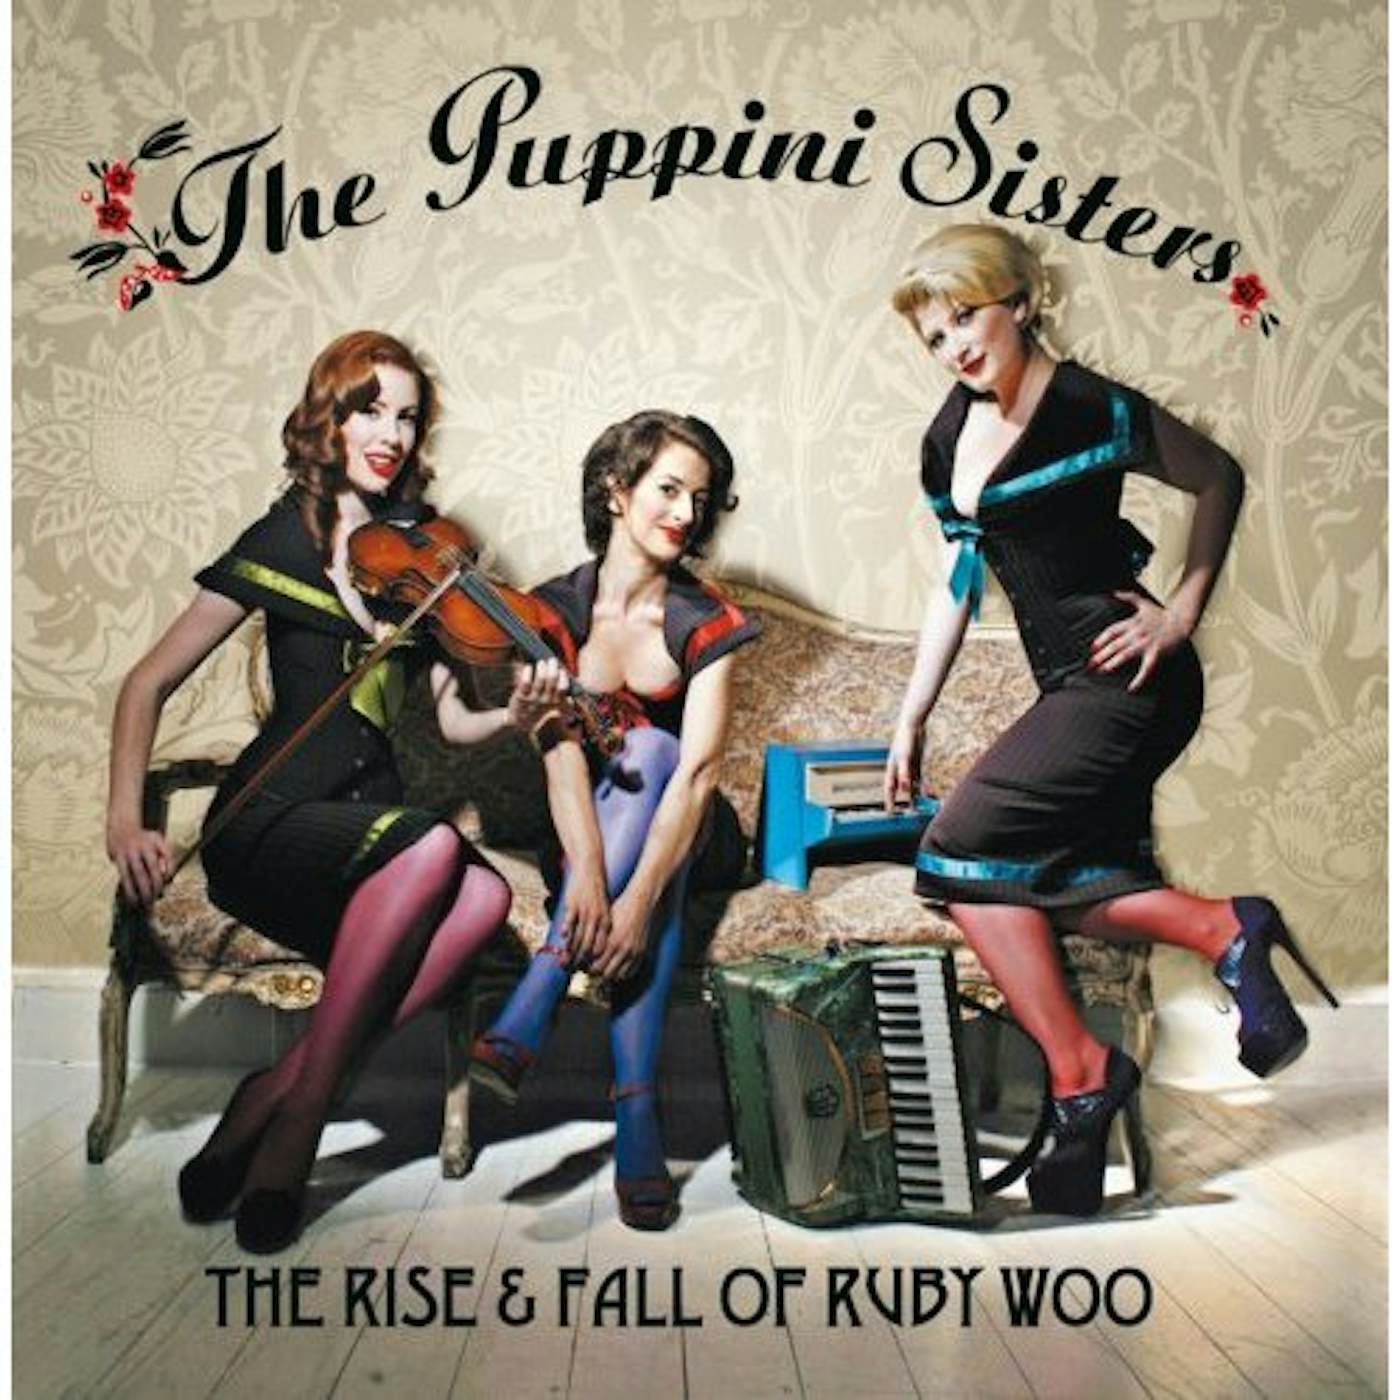 The Puppini Sisters RISE & FALL OF RUBY WOO CD